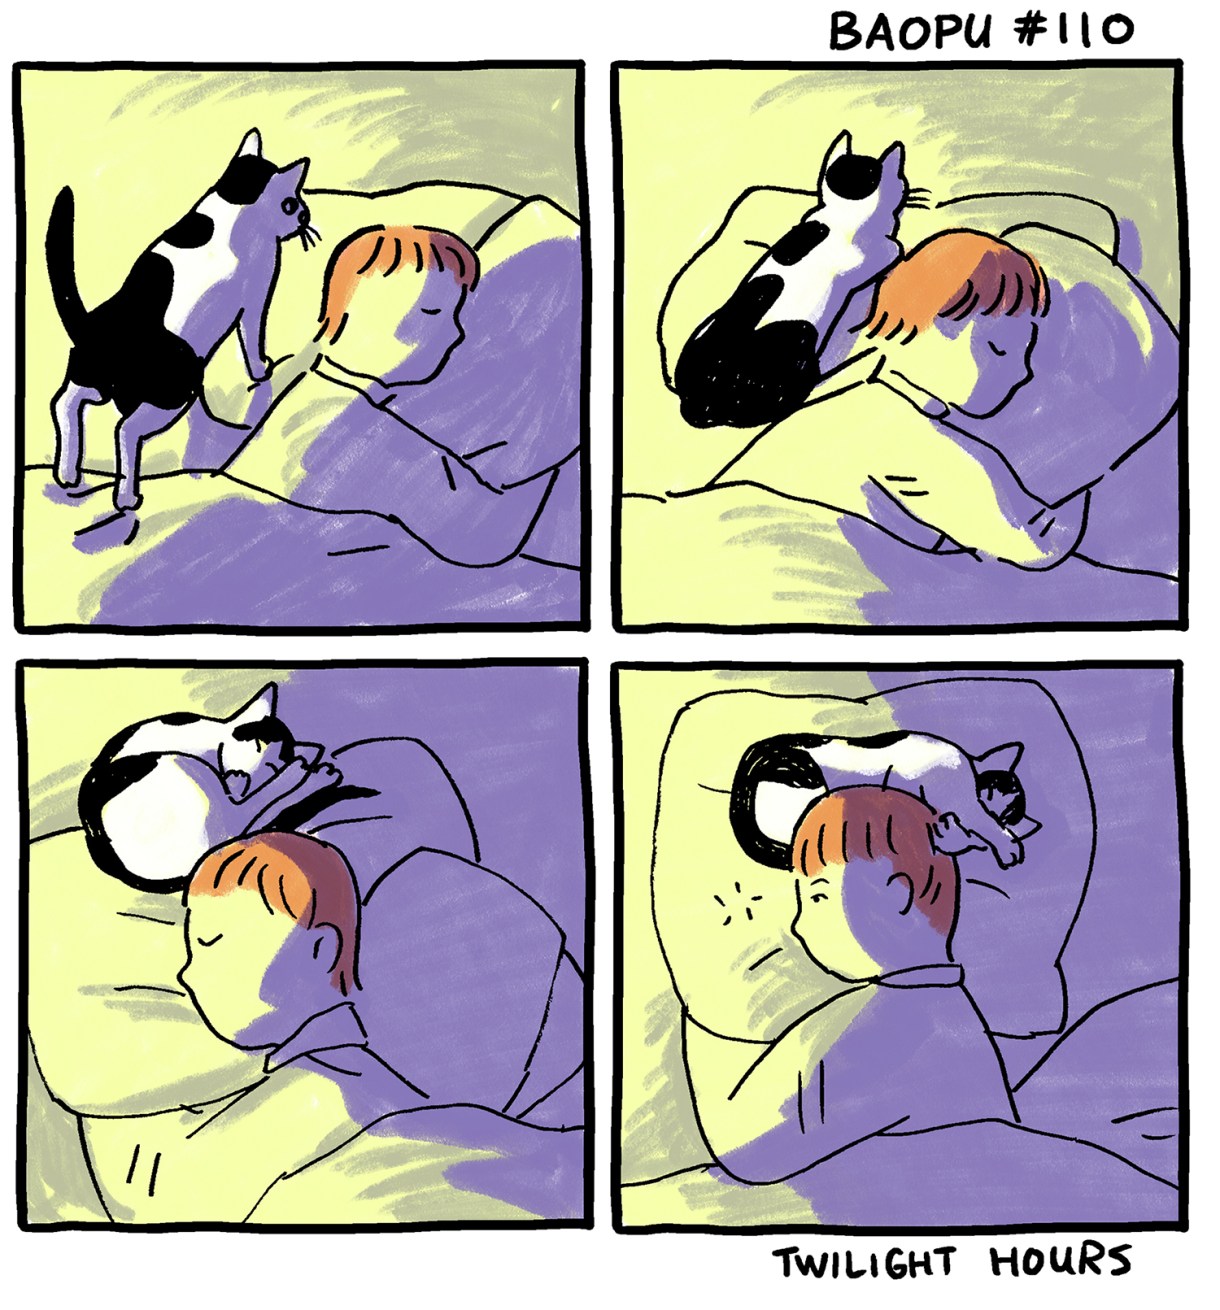 In a four panel comic, in shades of twilight purple and yellow, Baopu — an Asian person with red hair — snuggles their cat in bed.